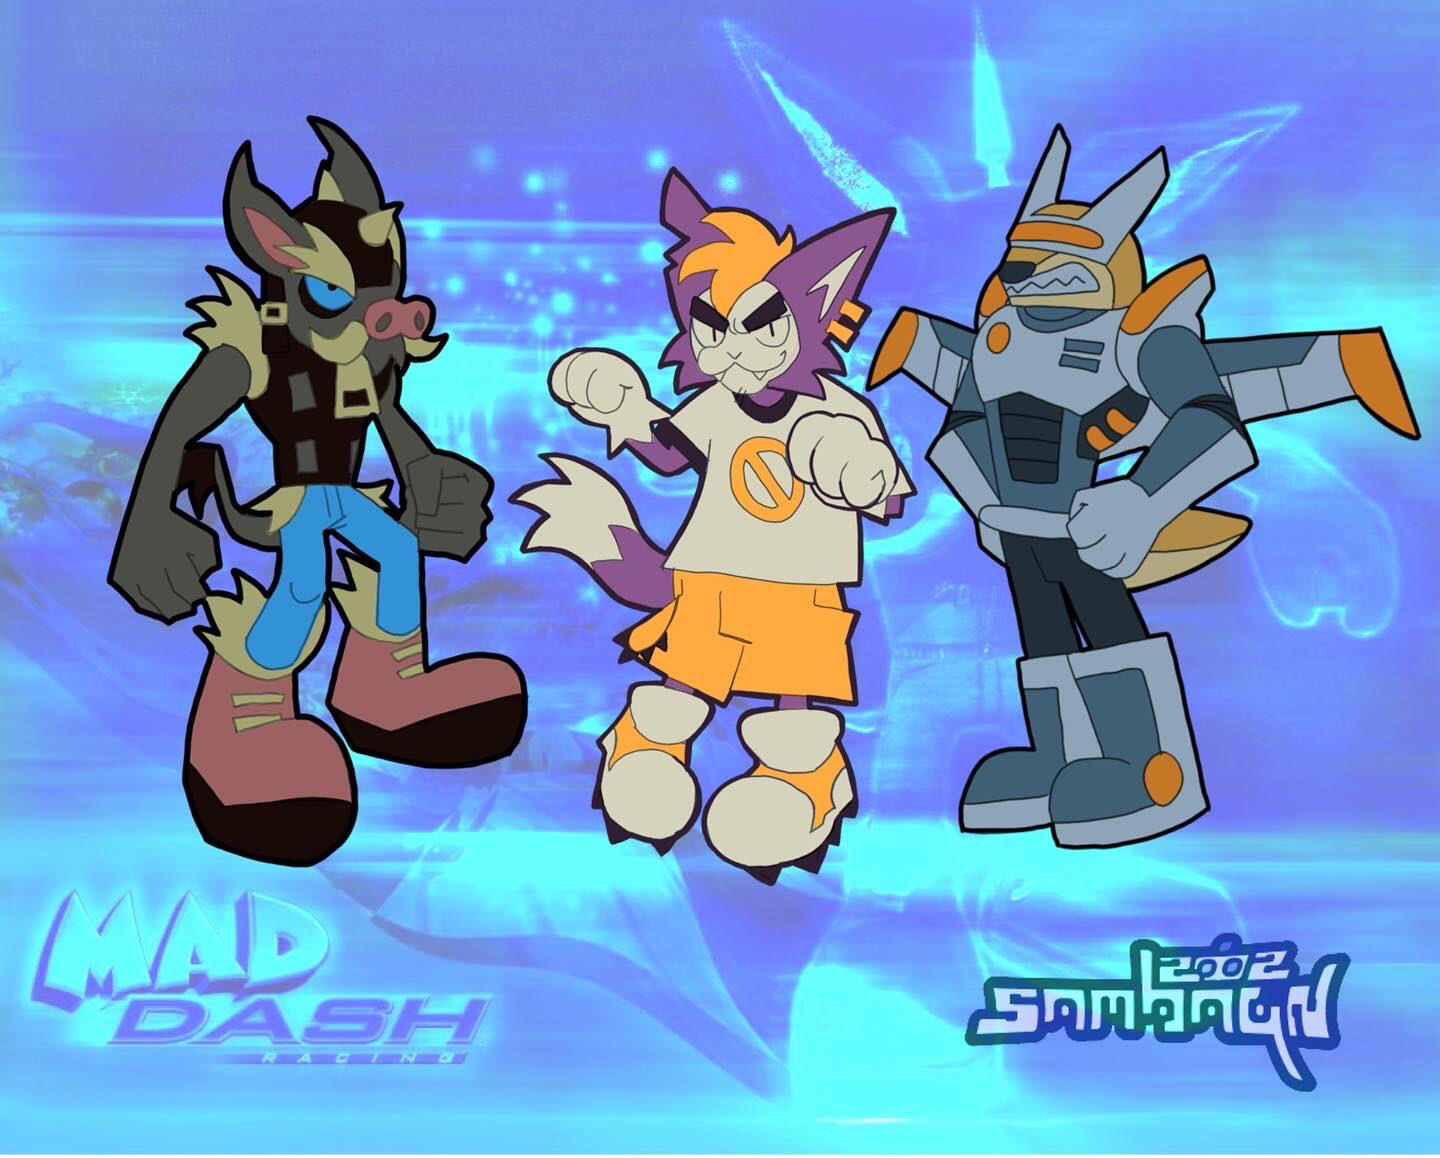 Redesigns of the main trio of characters from the 2001 xbox launch title, 'Mad Dash Racing'. I love the game, but felt that the main issue with the original character designs was lack of unification, which I attempted to aid. Done in 2022.